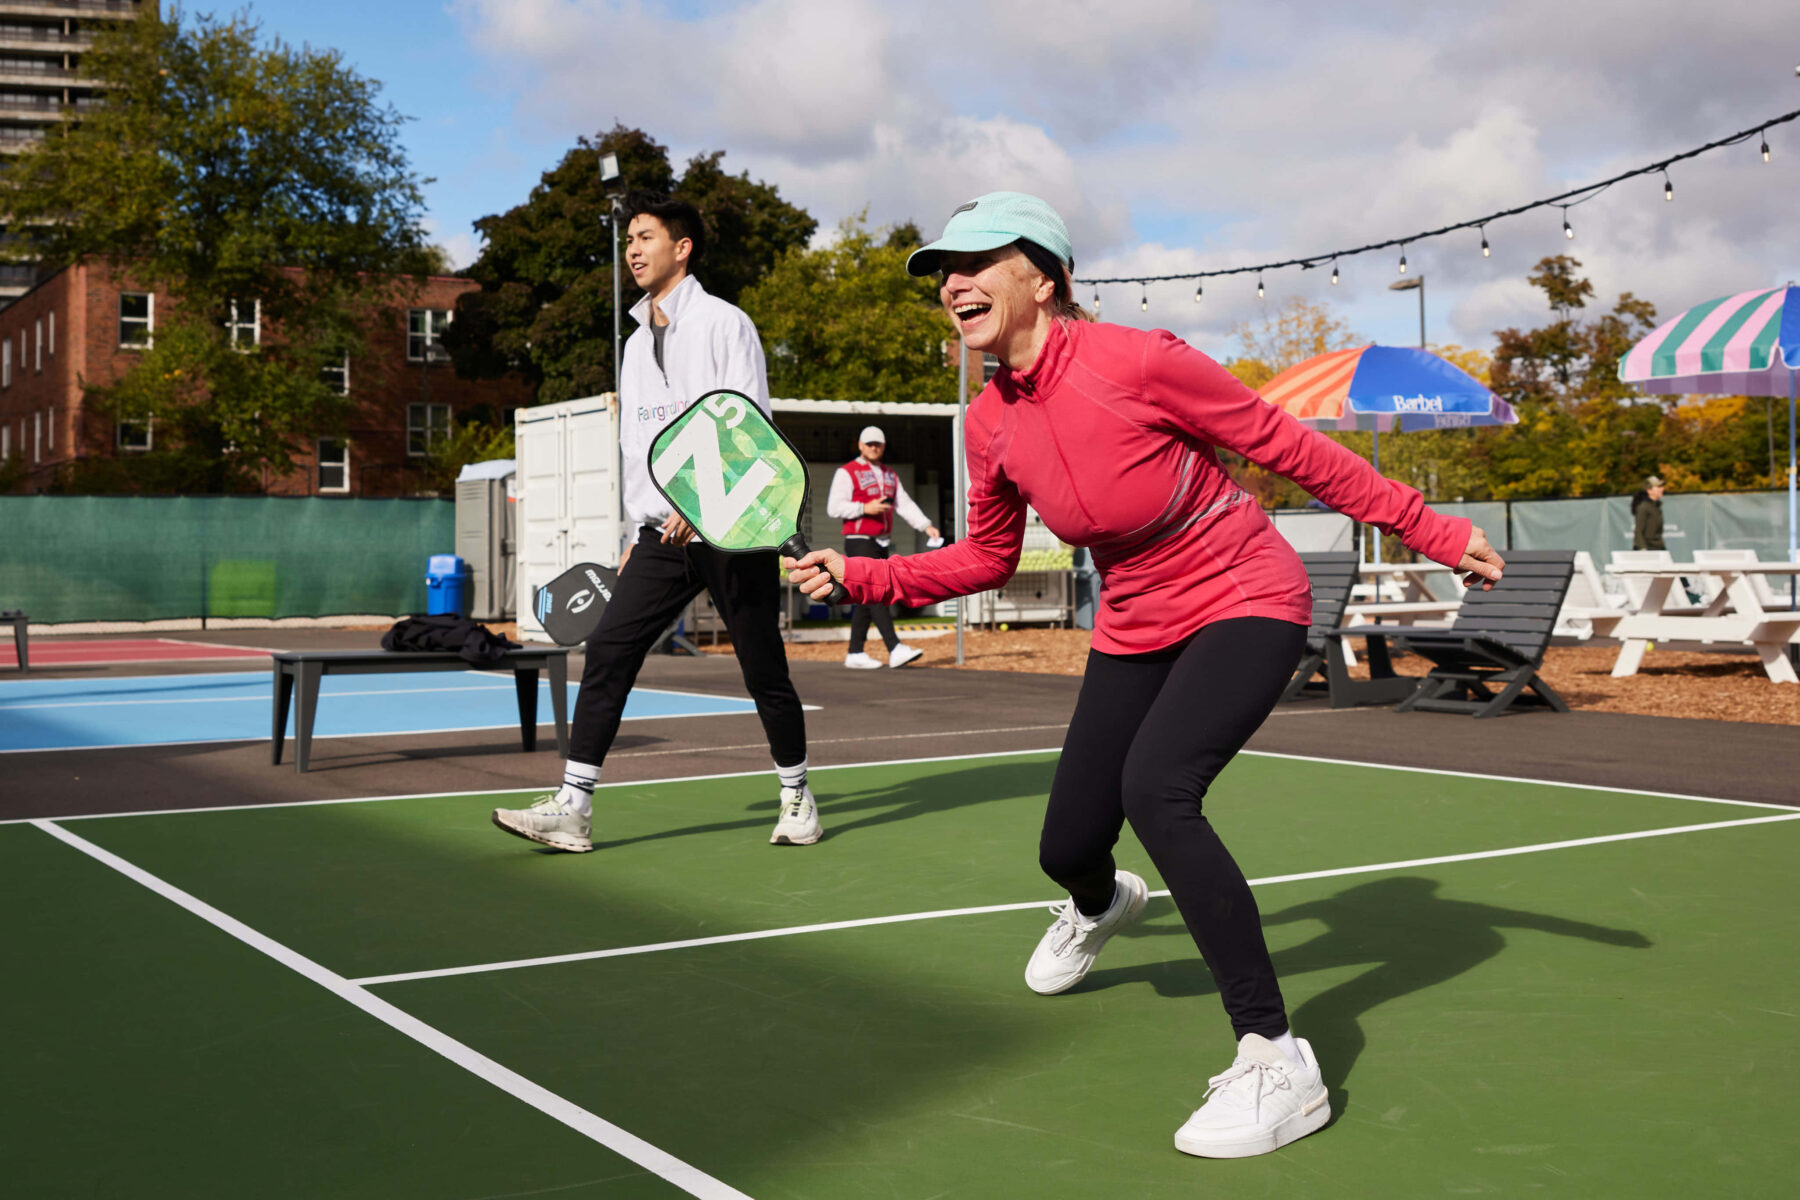 Why Pickleball is Gaining Popularity: A Combination of Fun, Inclusivity, and Health Benefits